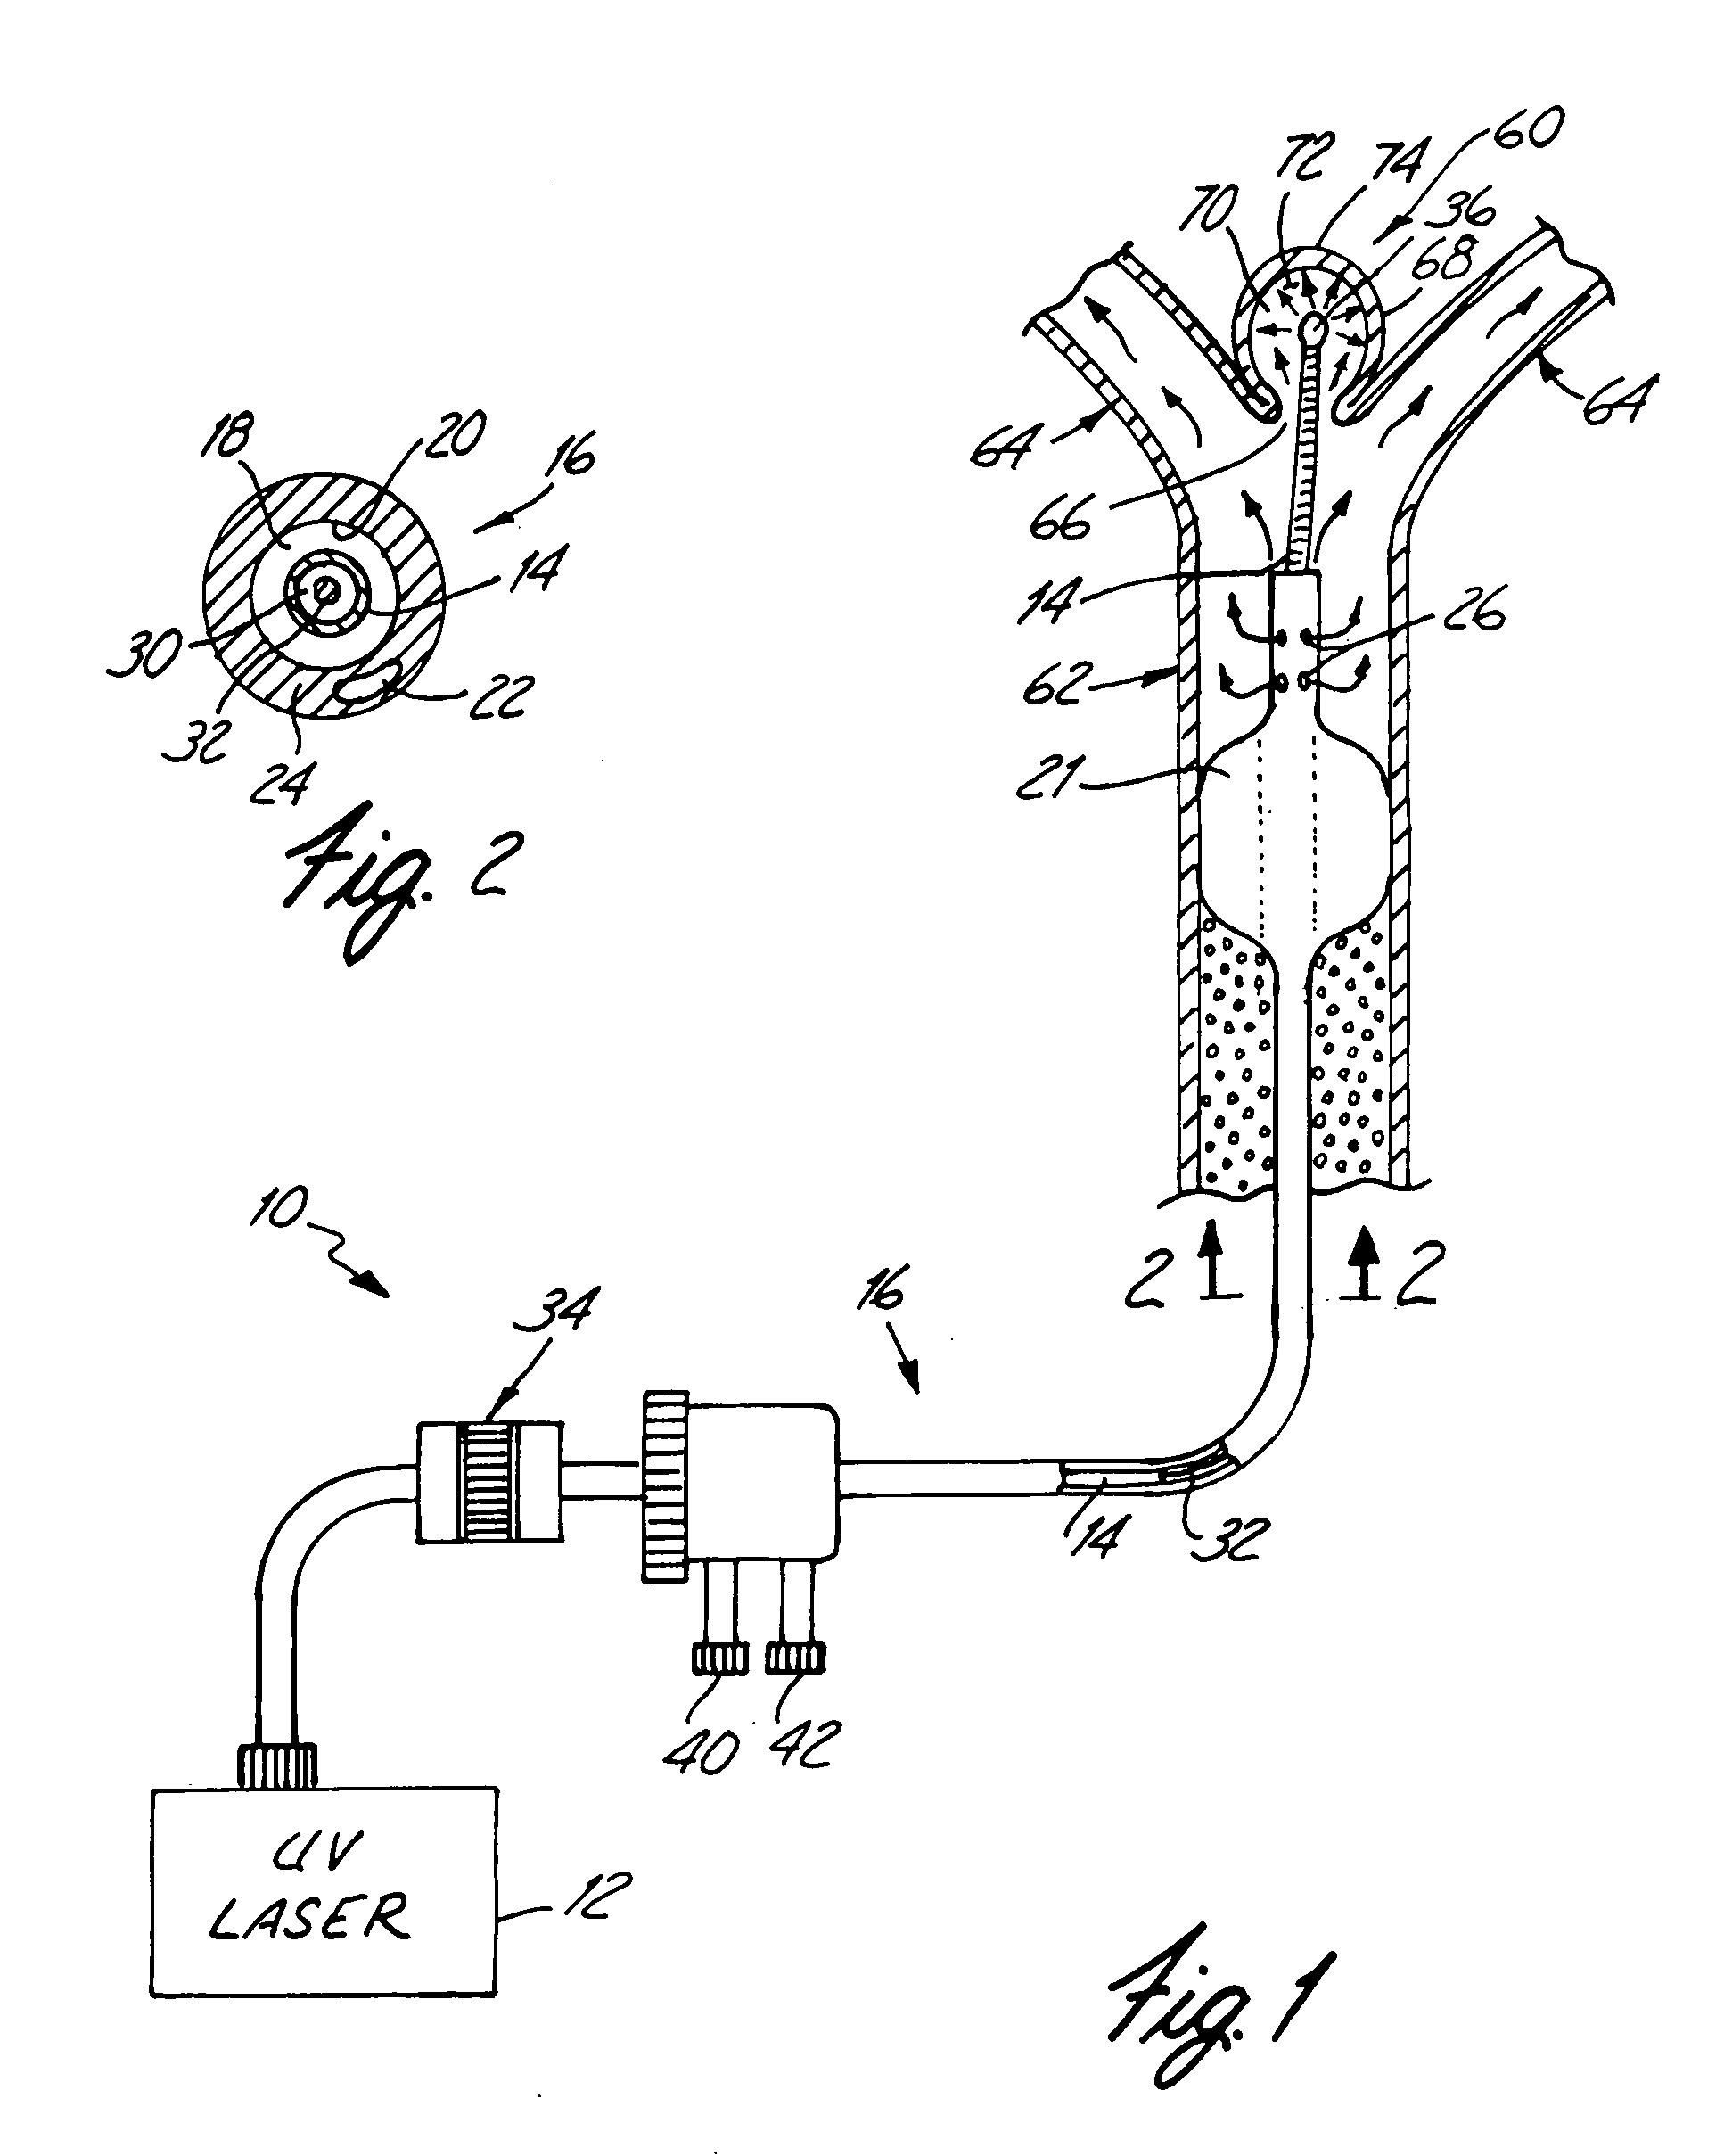 Apparatus and method for treatment of cerebral aneurysms, arterial-vascular malformations and arterial fistulas